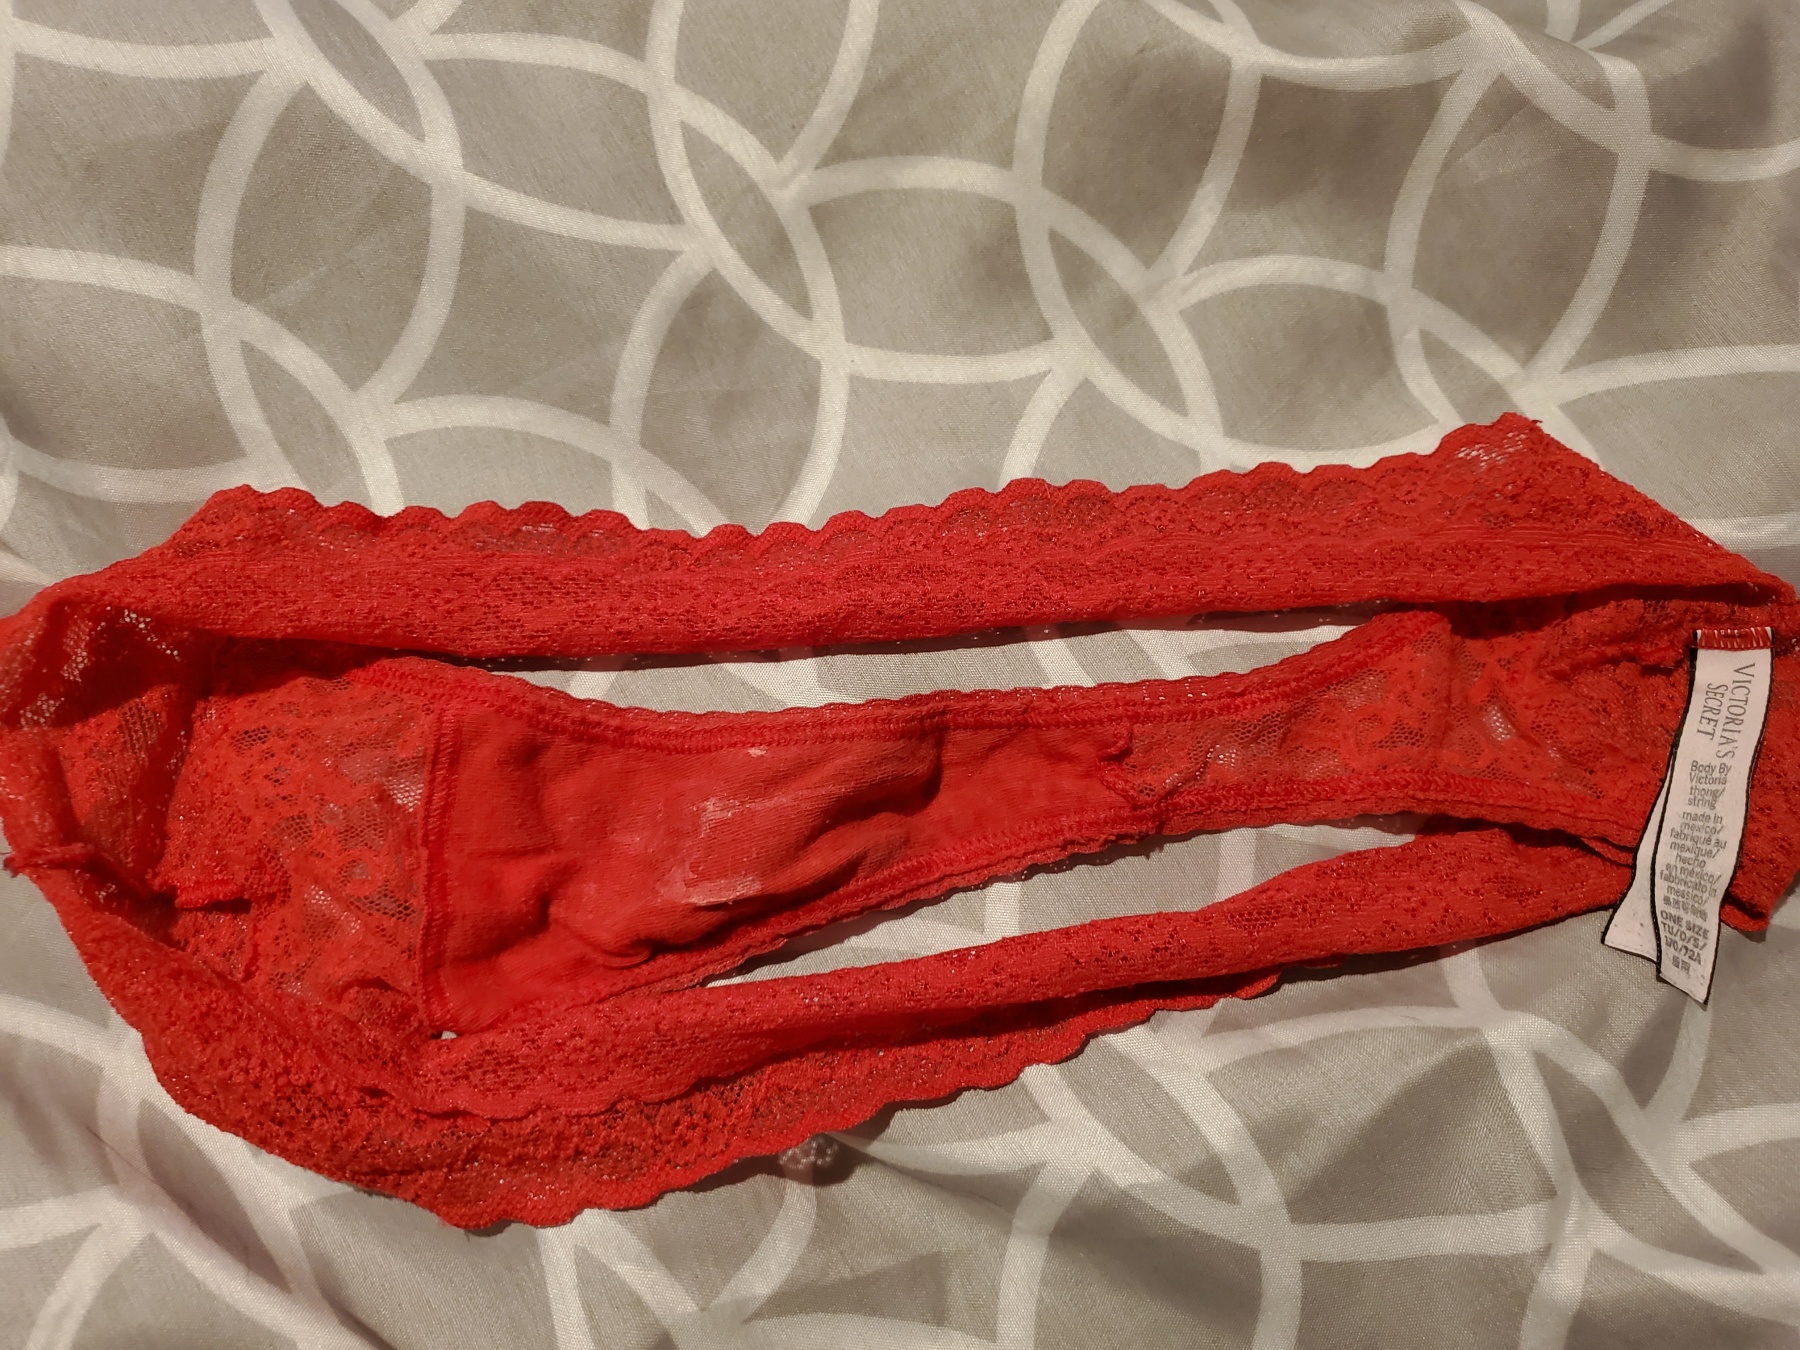 Creamed Stained Thong Myusedpantystore Com